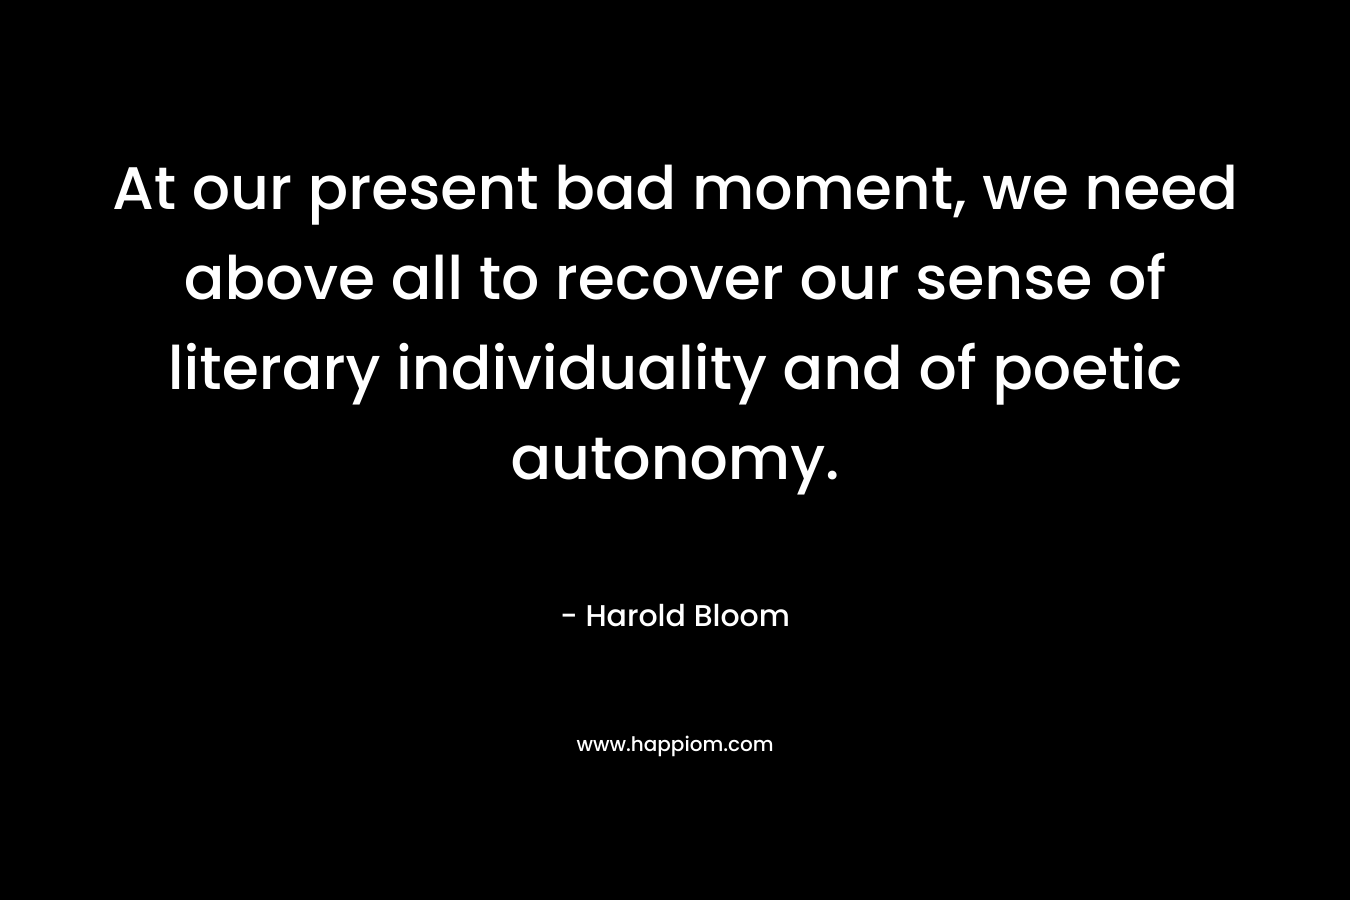 At our present bad moment, we need above all to recover our sense of literary individuality and of poetic autonomy. – Harold Bloom